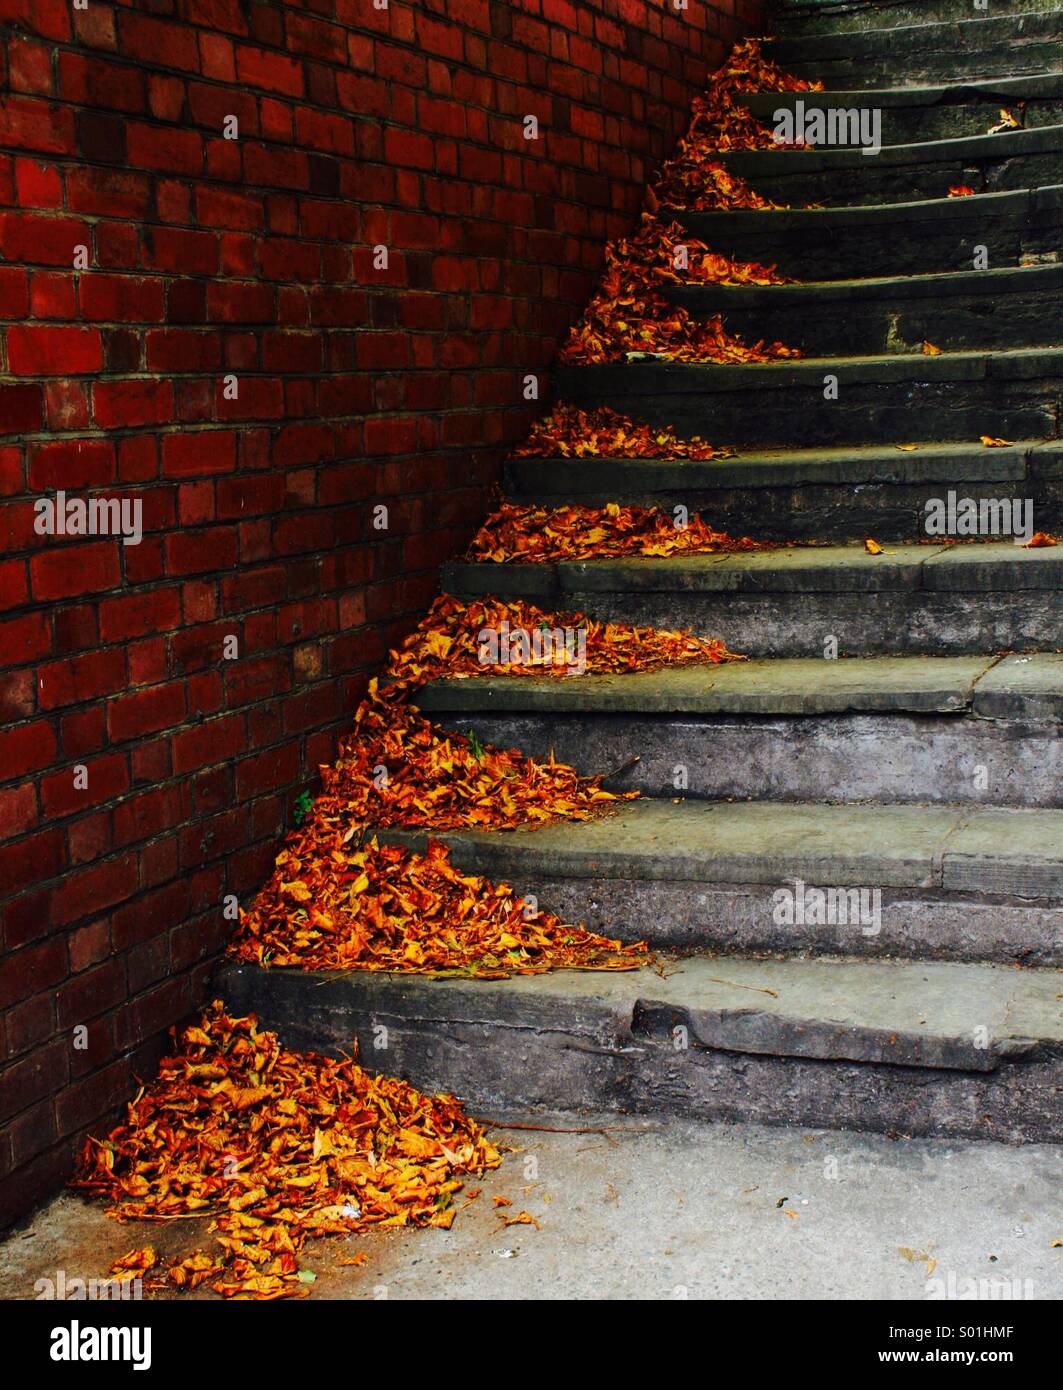 Autumn leaves blown into corners of stone steps Stock Photo